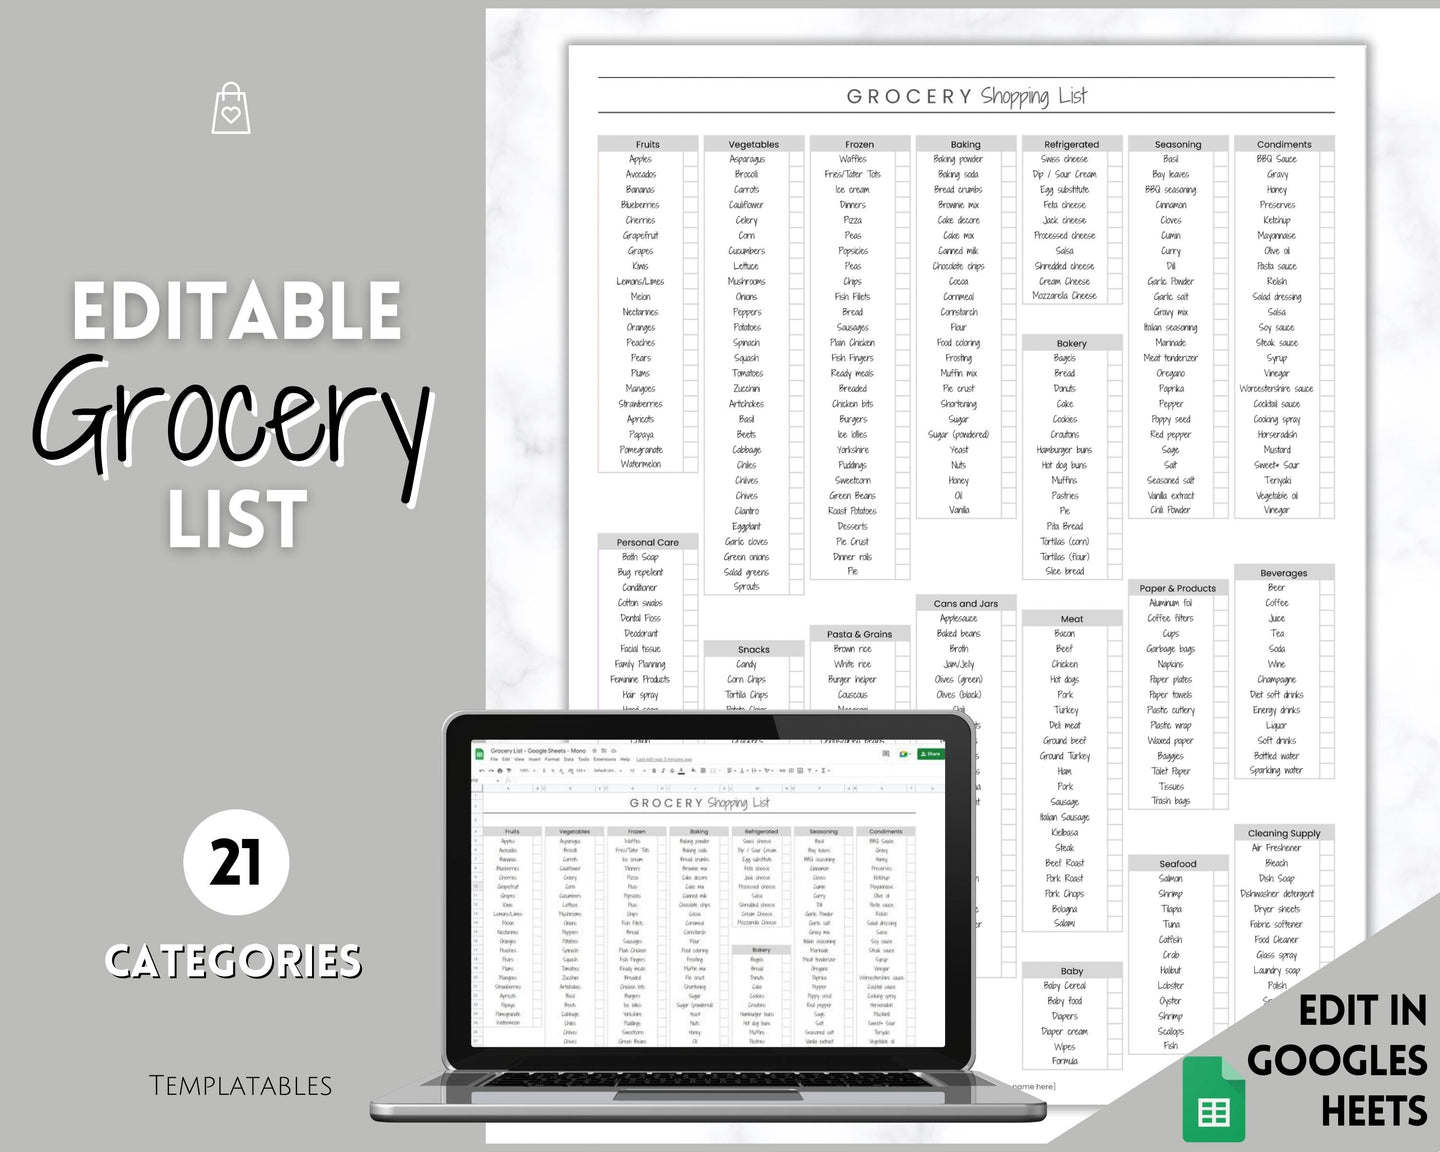 EDITABLE Grocery List Printable | Digital Weekly Shopping, Meal Planner Checklist, Kitchen Organization Template, Google Sheets | Mono